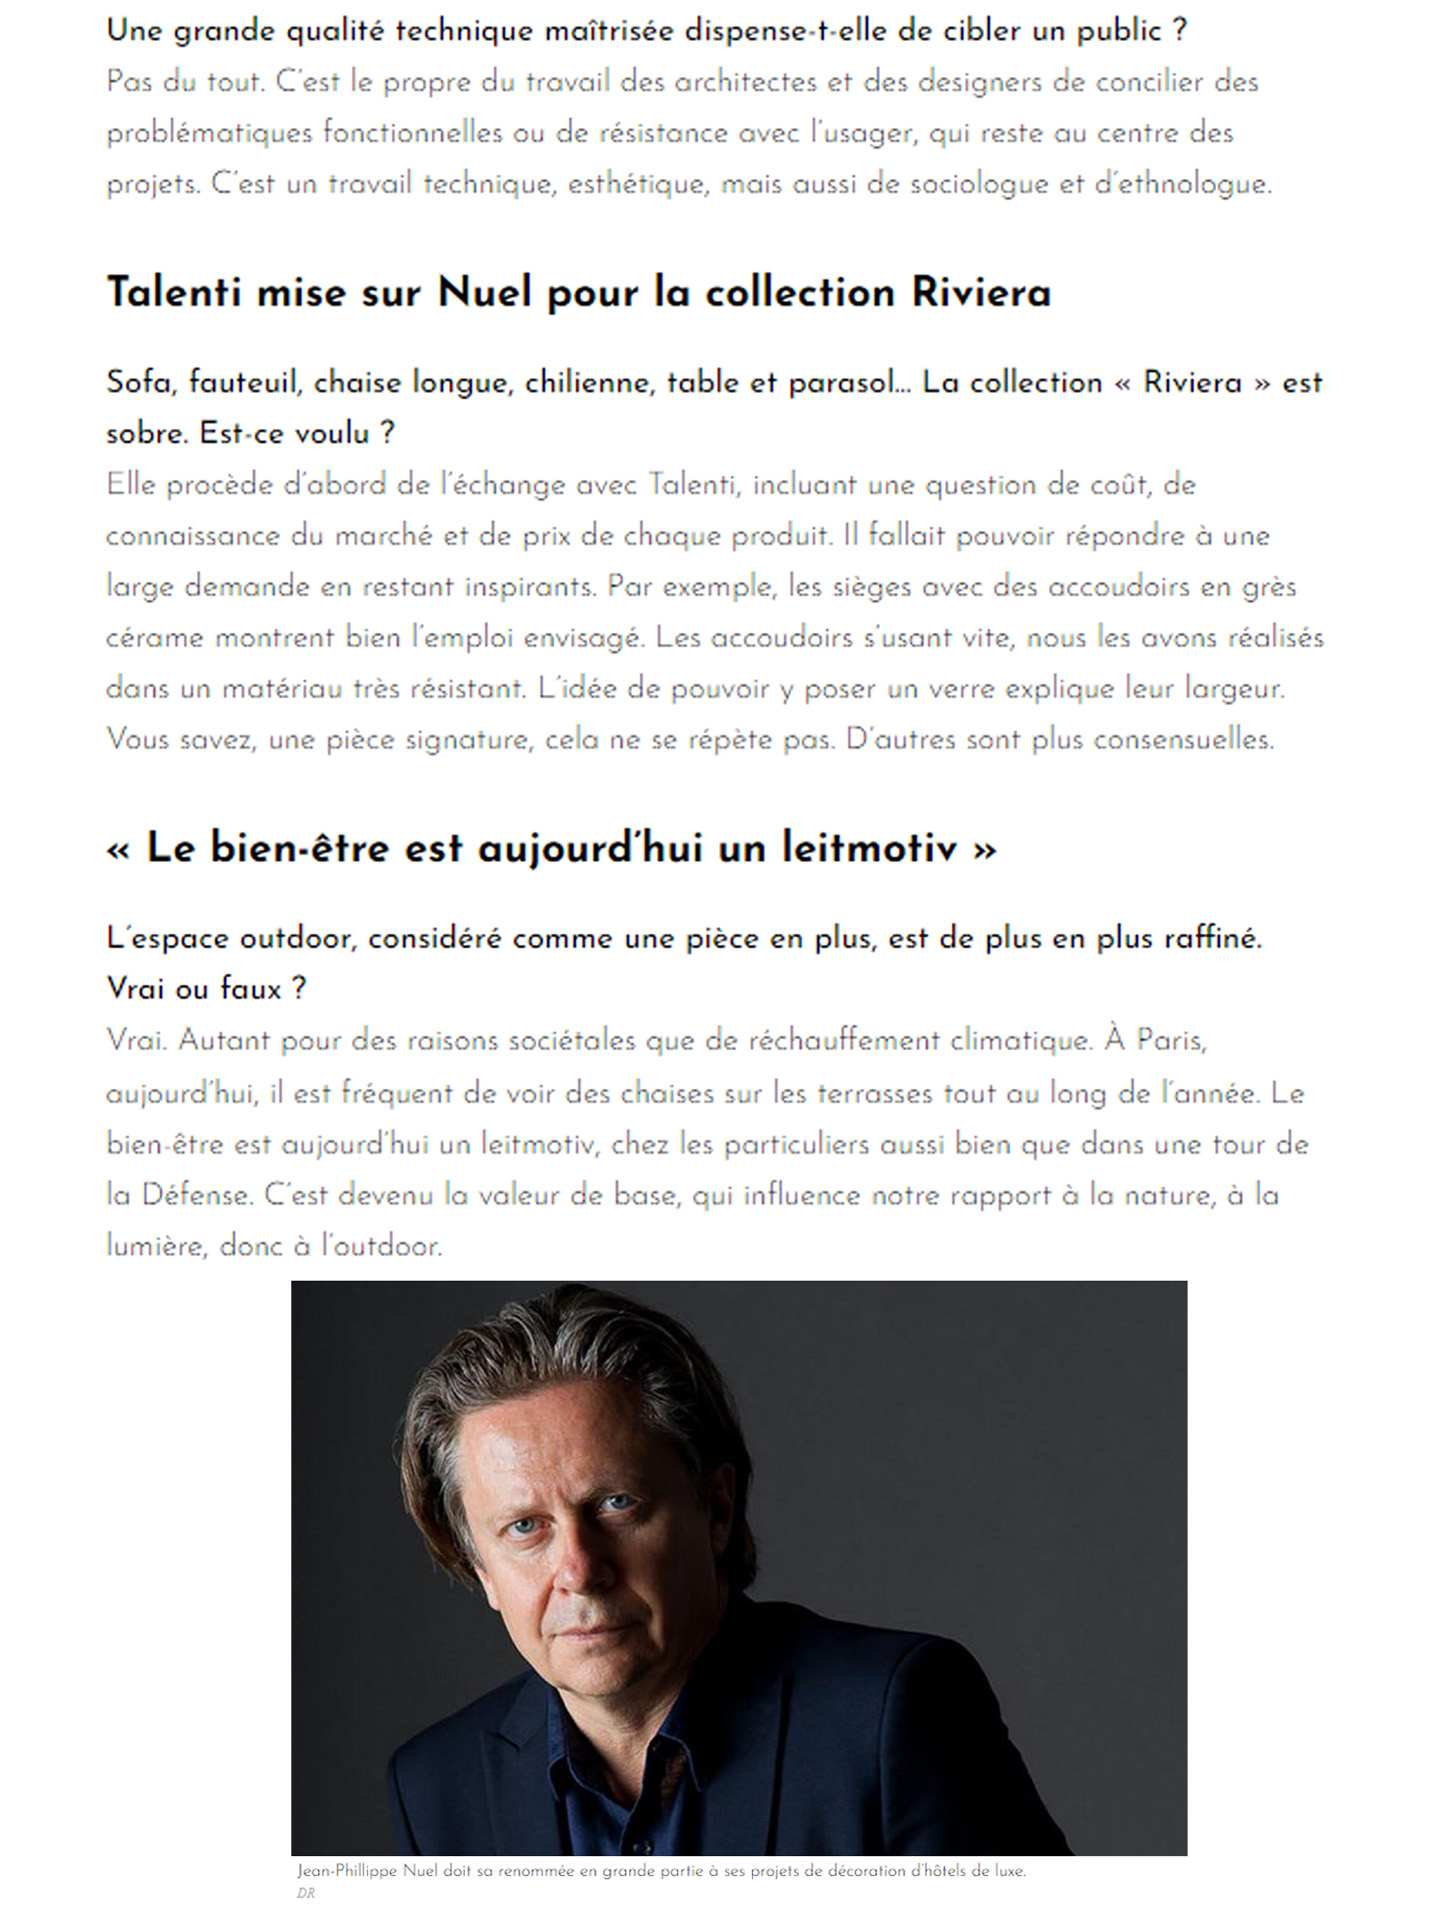 Article on the riviera range for talenti outdoor living created by the studio jean-philippe nuel, design of objects and furniture, garden furniture, french designer